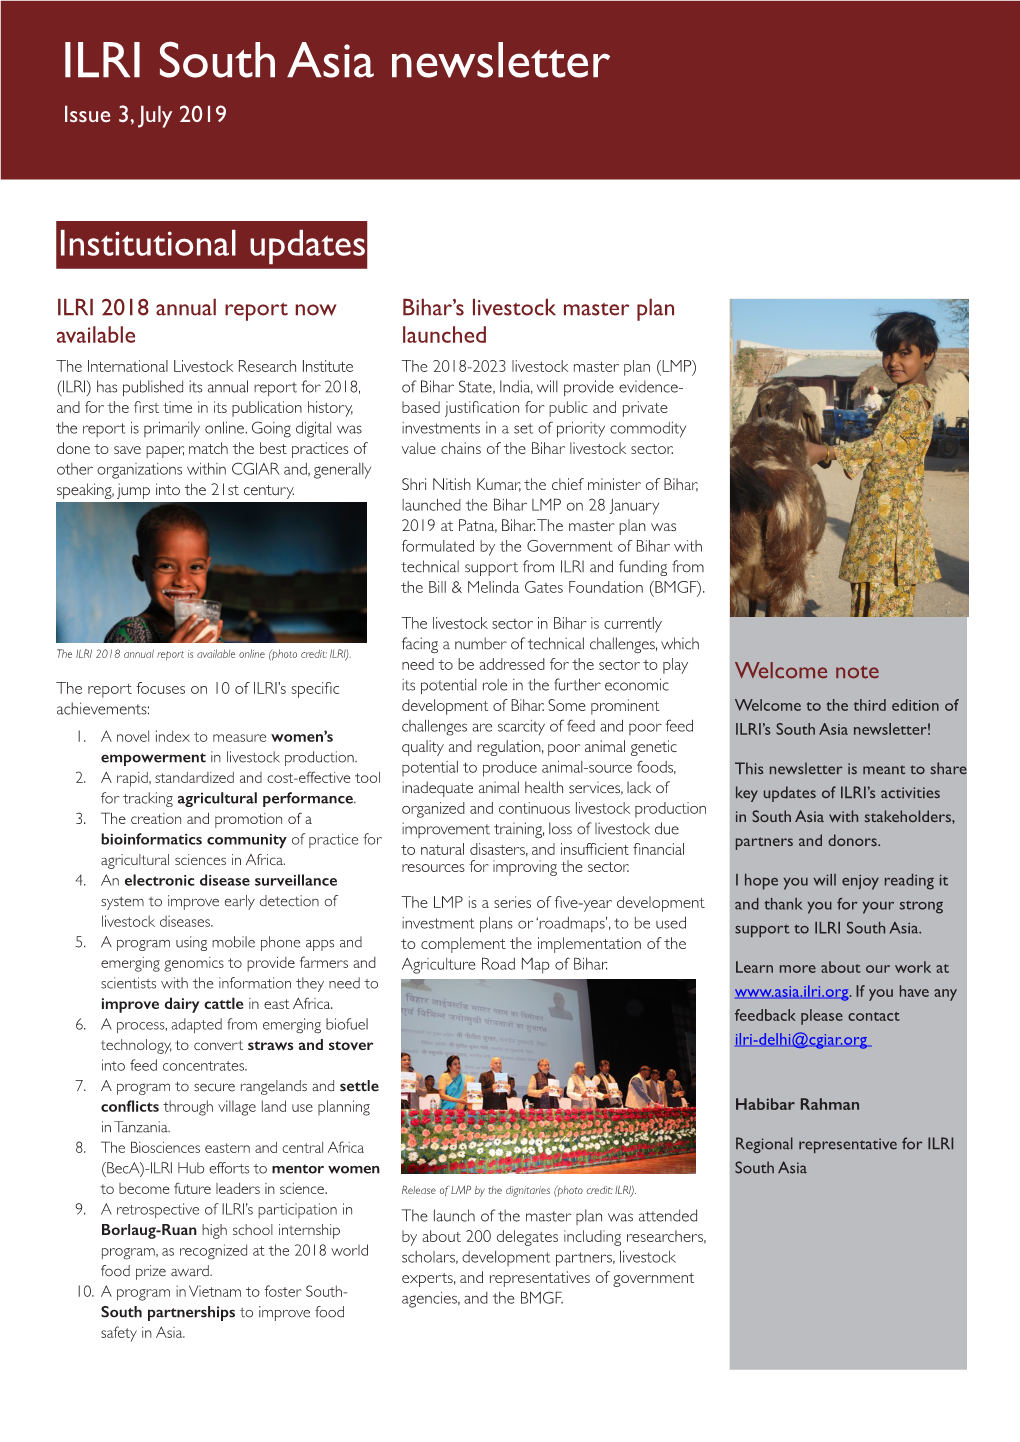 ILRI South Asia Newsletter Issue 3, July 2019